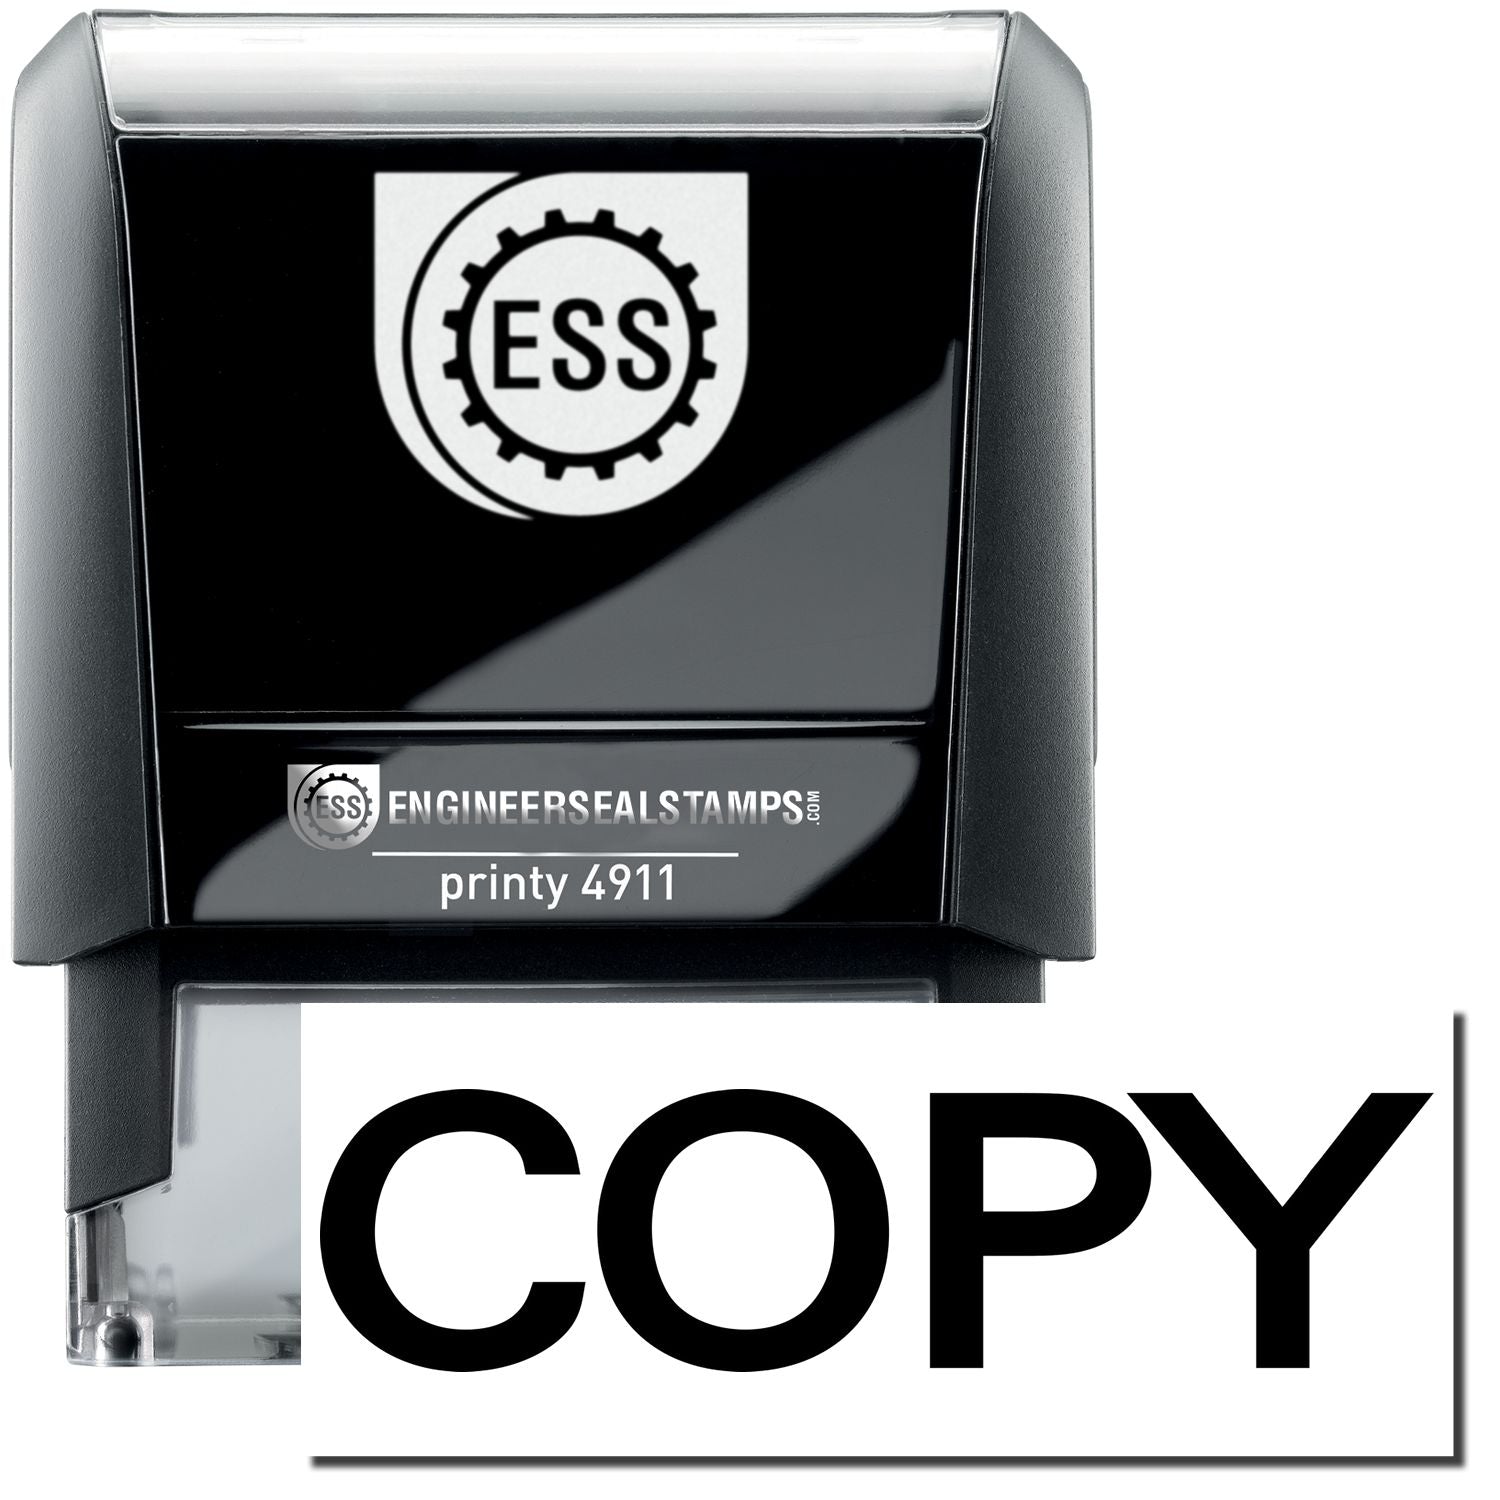 A self-inking stamp with a stamped image showing how the text "COPY" in bold font is displayed after stamping.